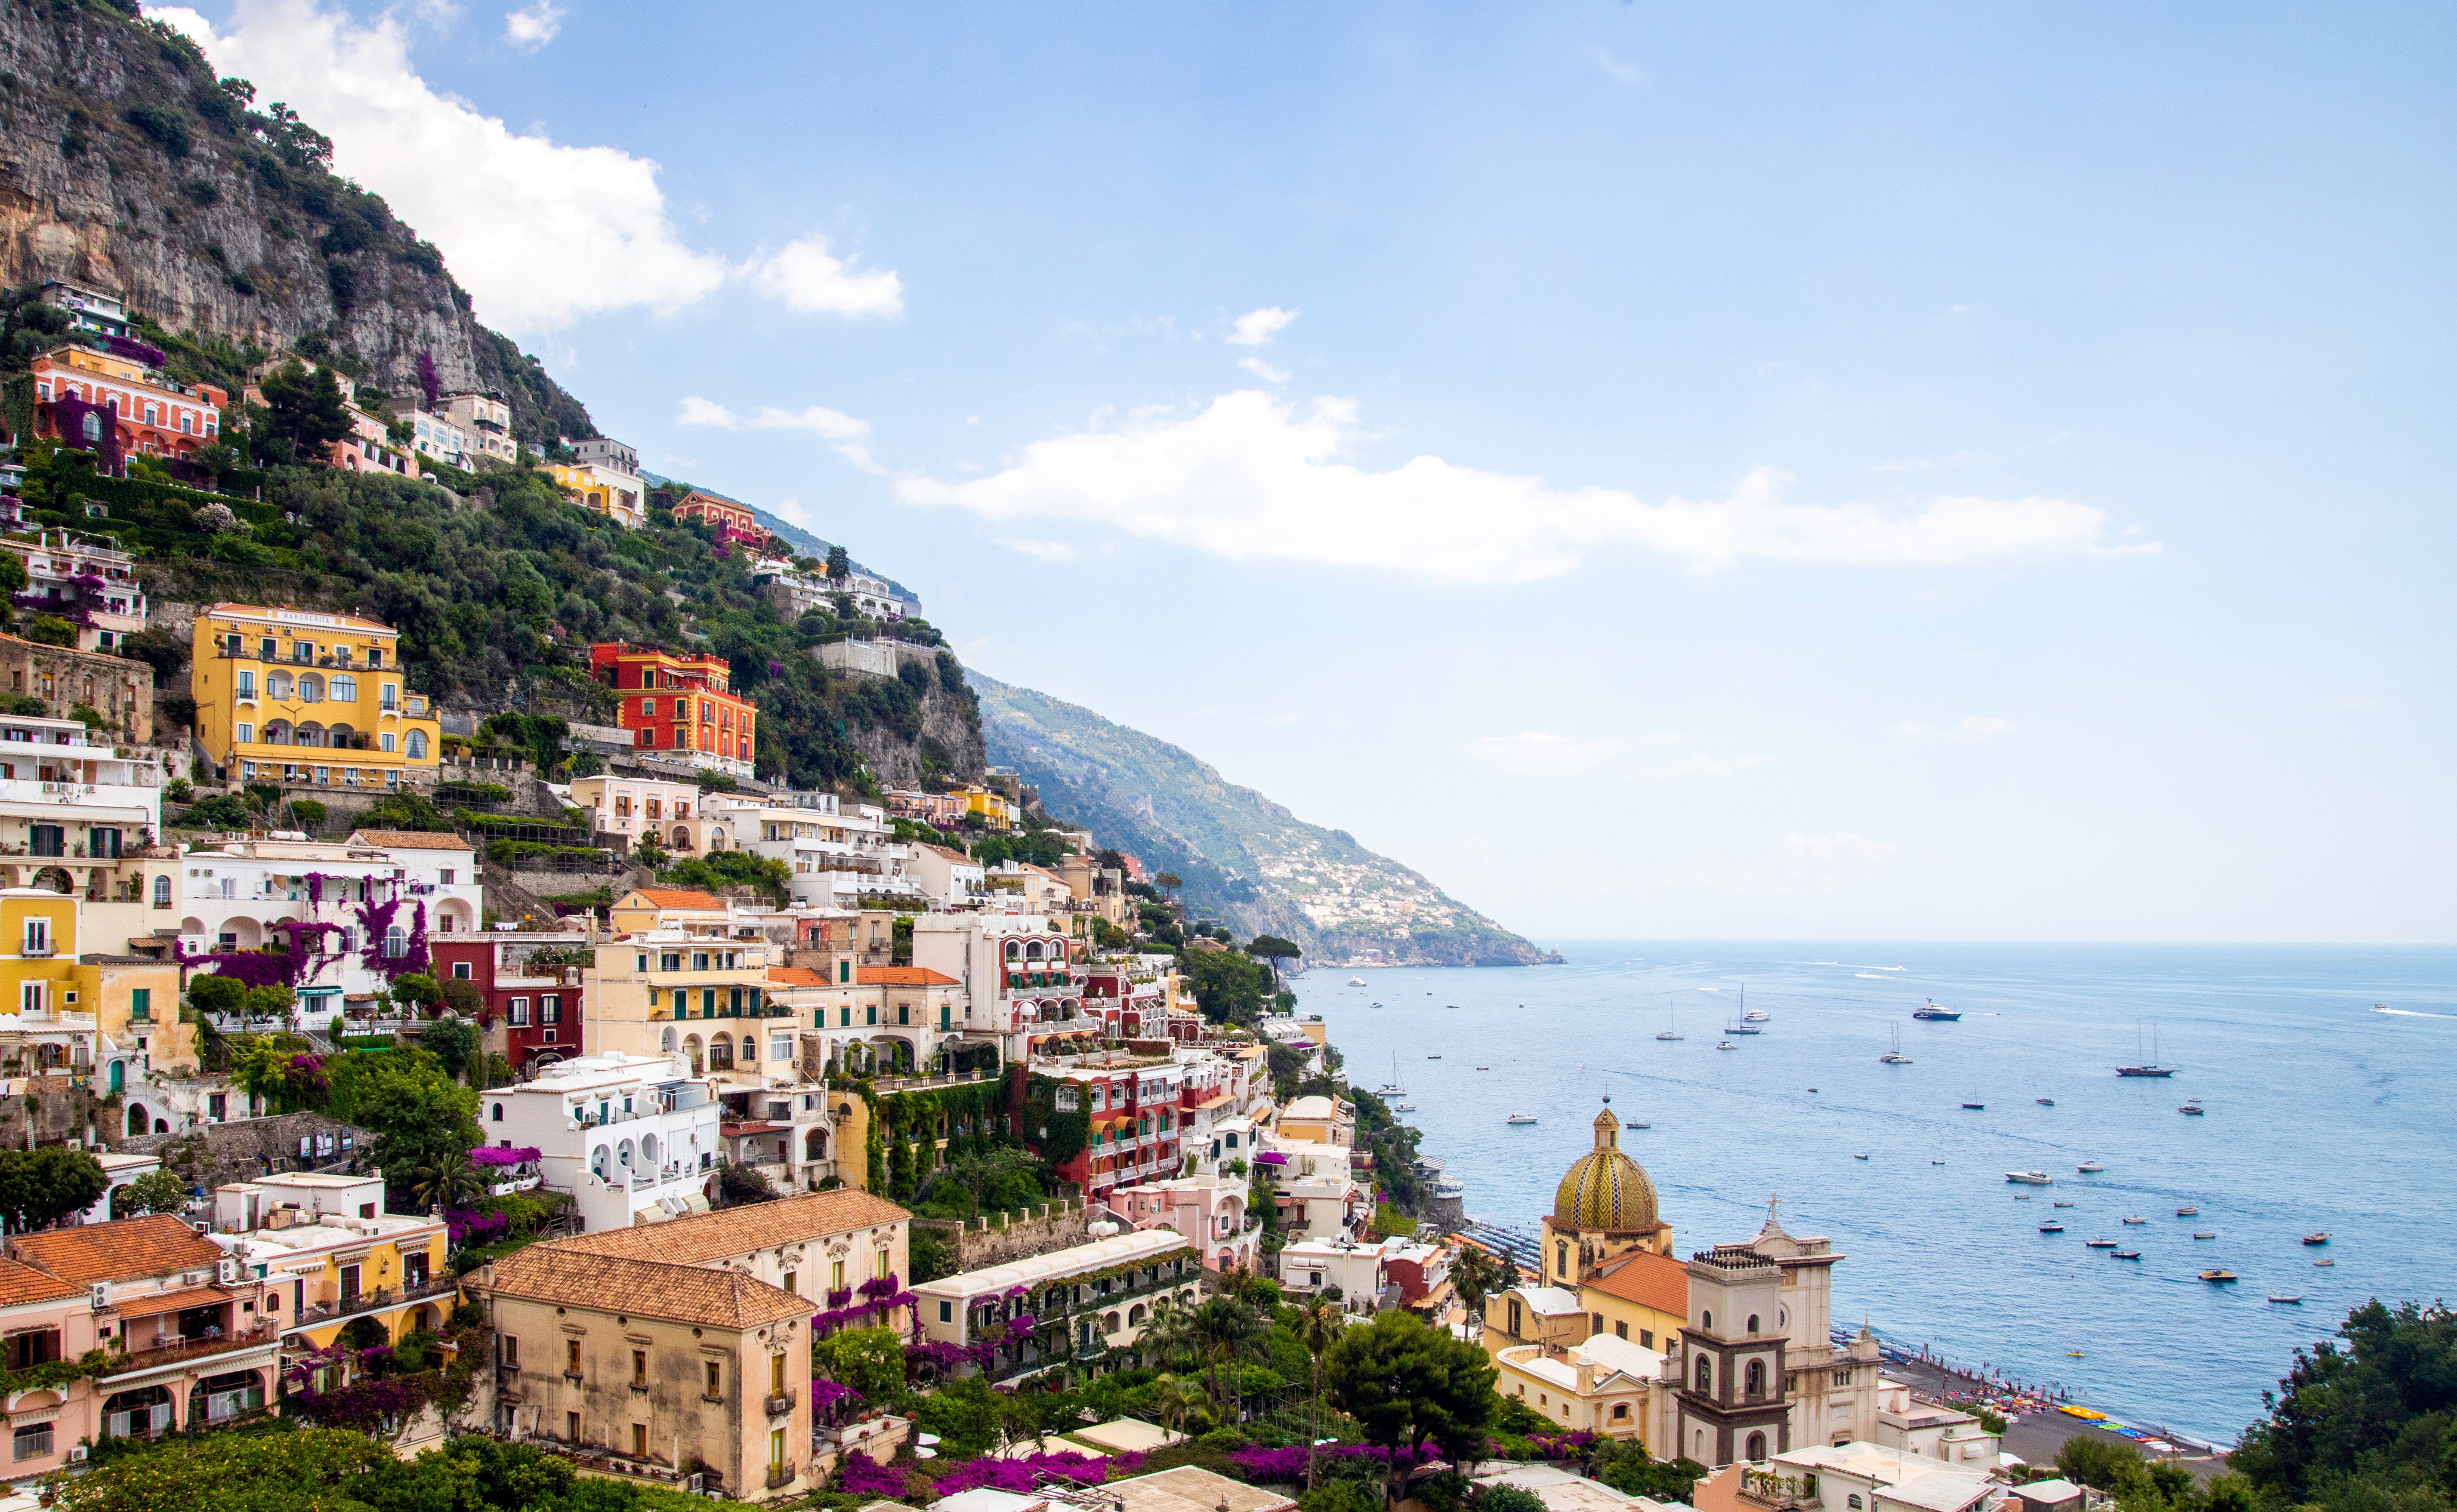 Add Positano, Italy to your itinerary for the Amalfi Coast.